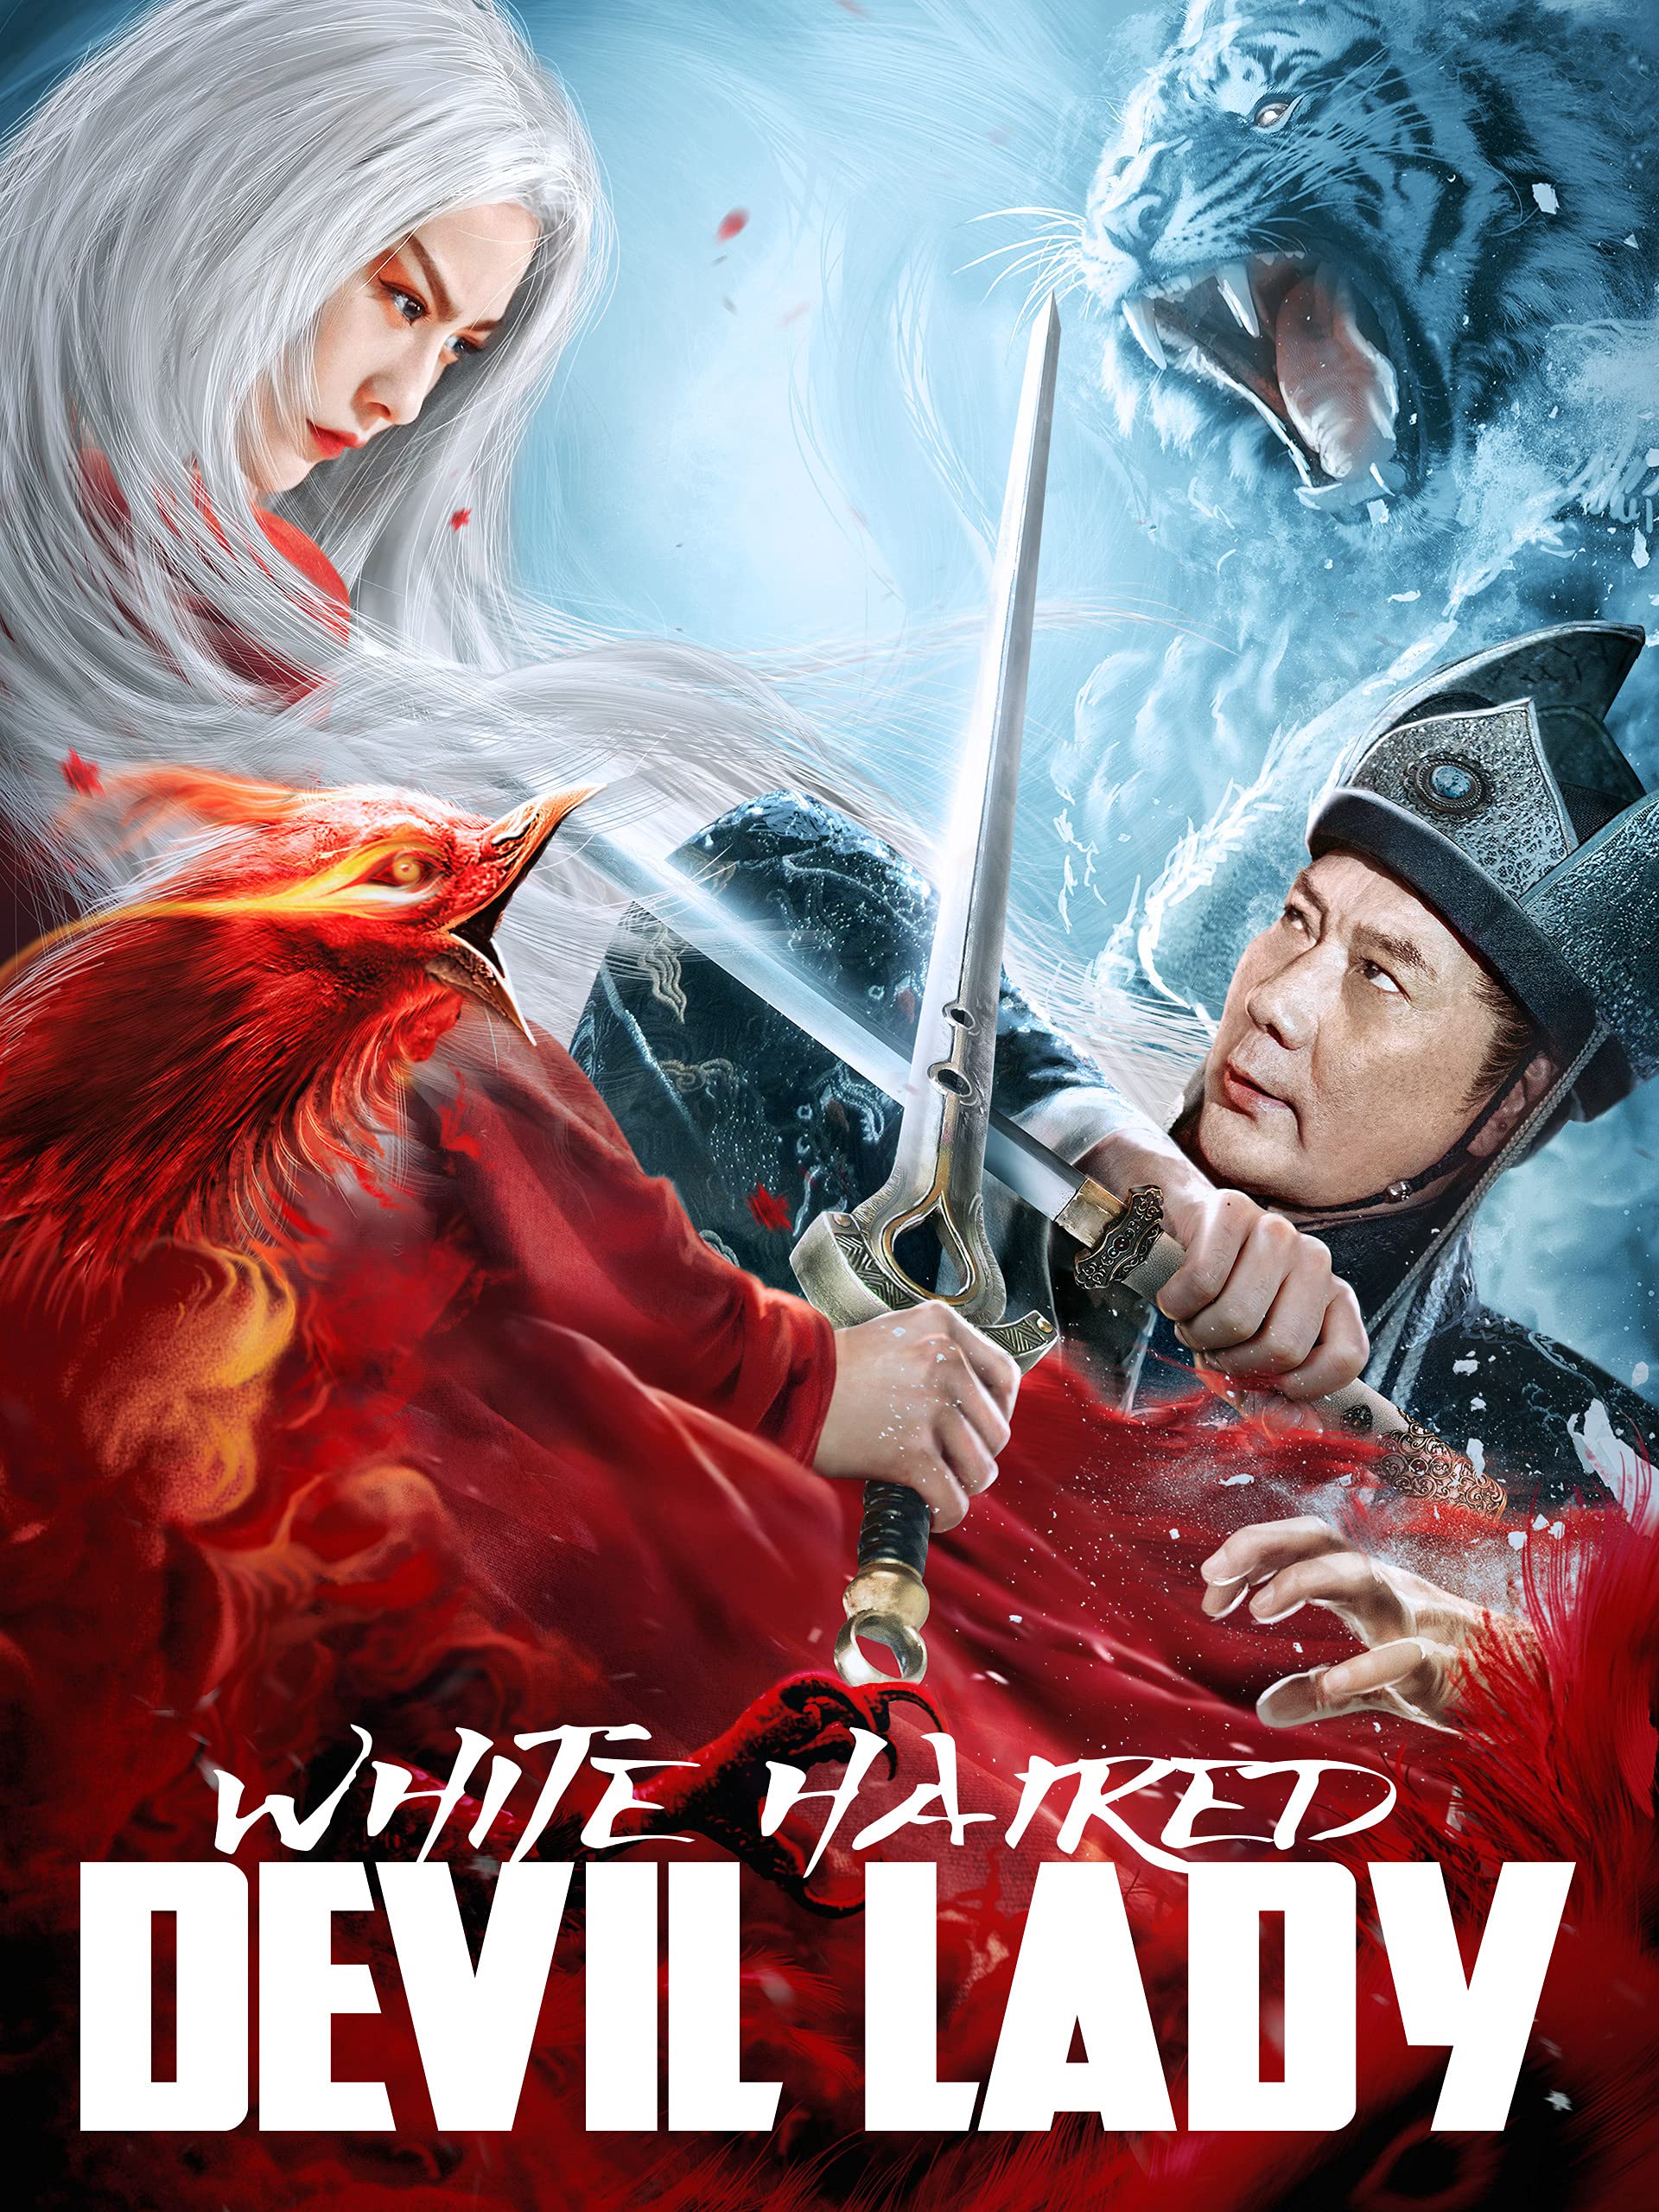 White Haired Devil Lady 2020 Hindi ORG Dual Audio 480p HDRip 262MB Download